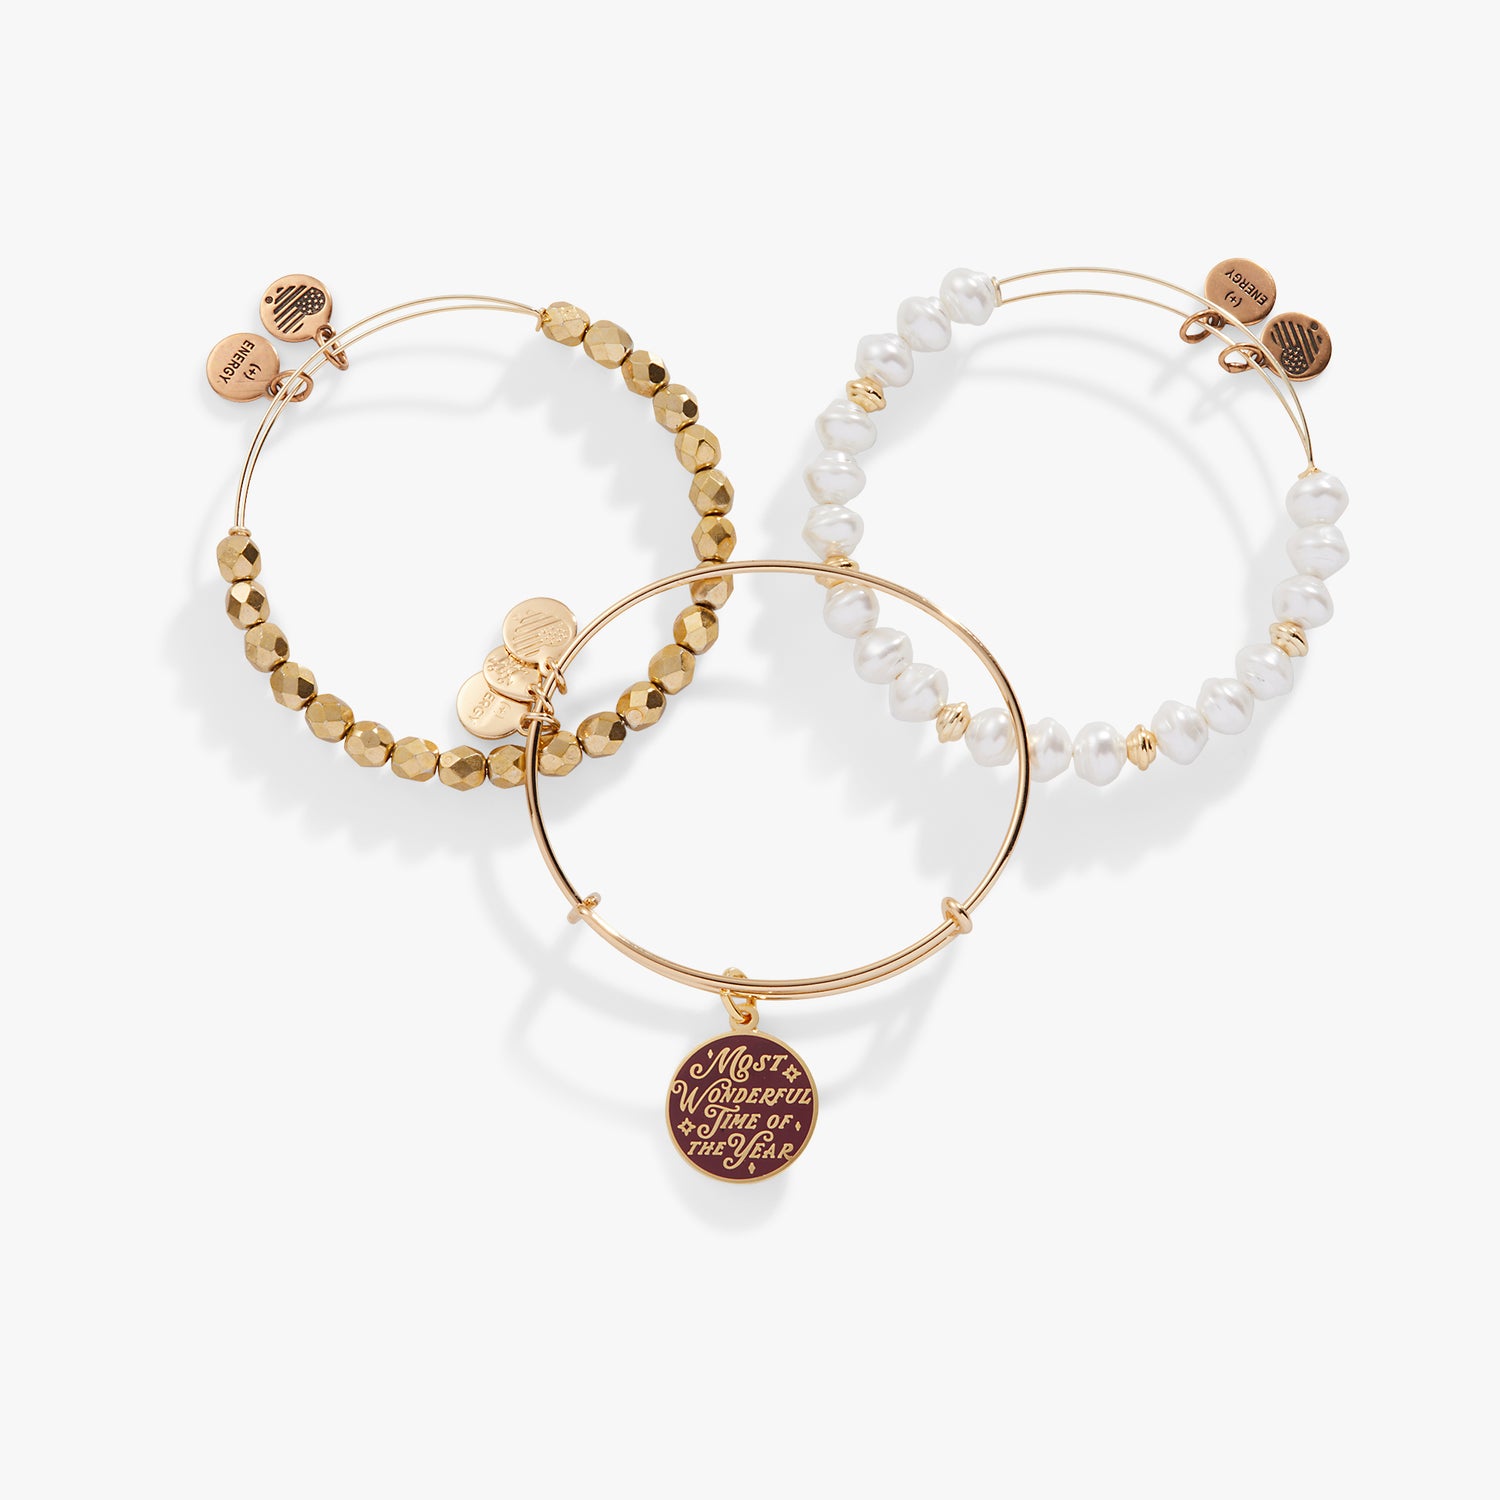 'Most Wonderful Time of the Year' Charm Bangle, Set of 3